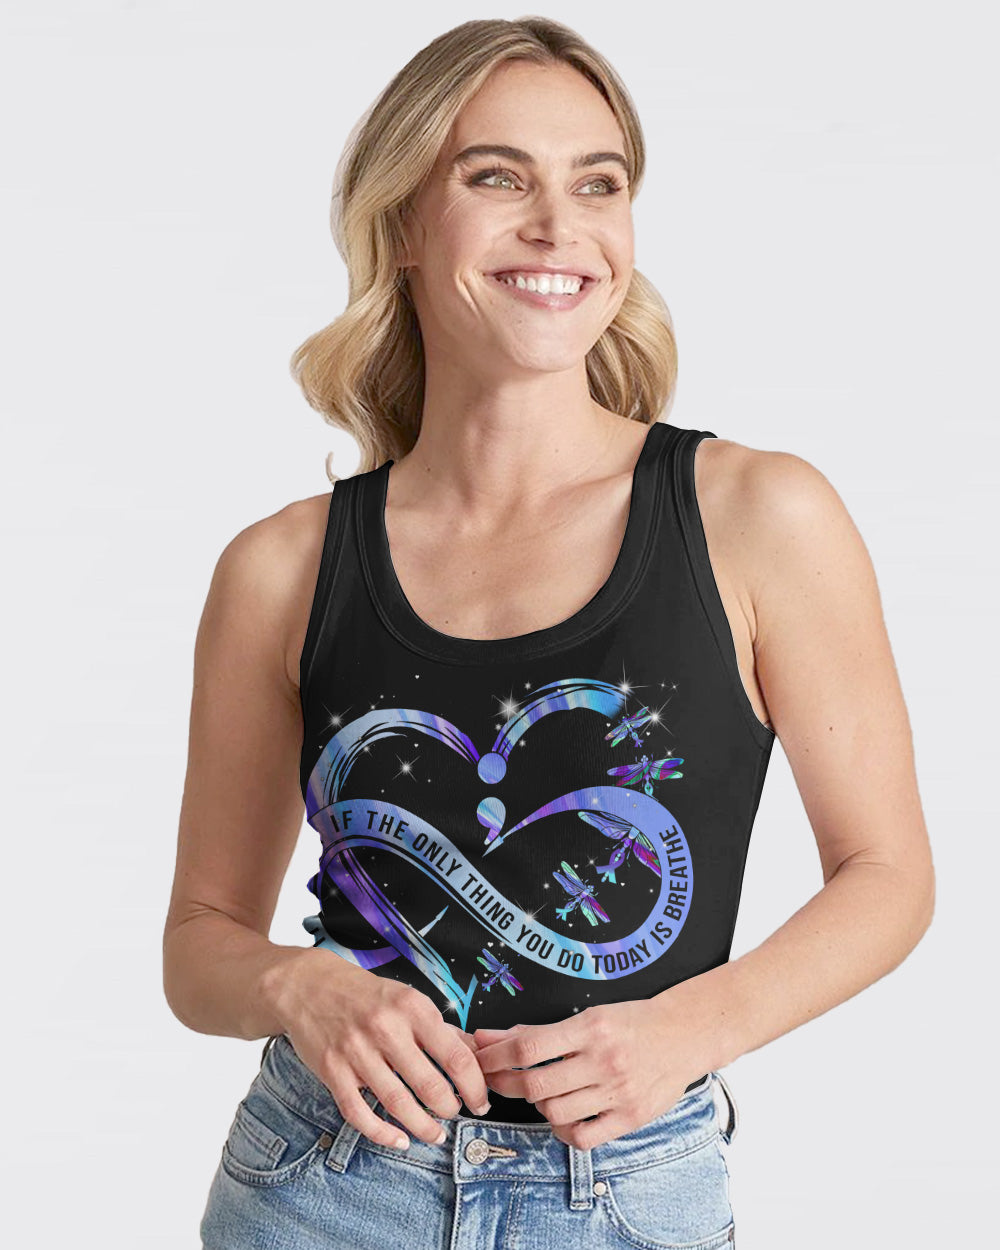 Your Life Matters Suicide Prevention Awareness Women's Suicide Awareness Tanks